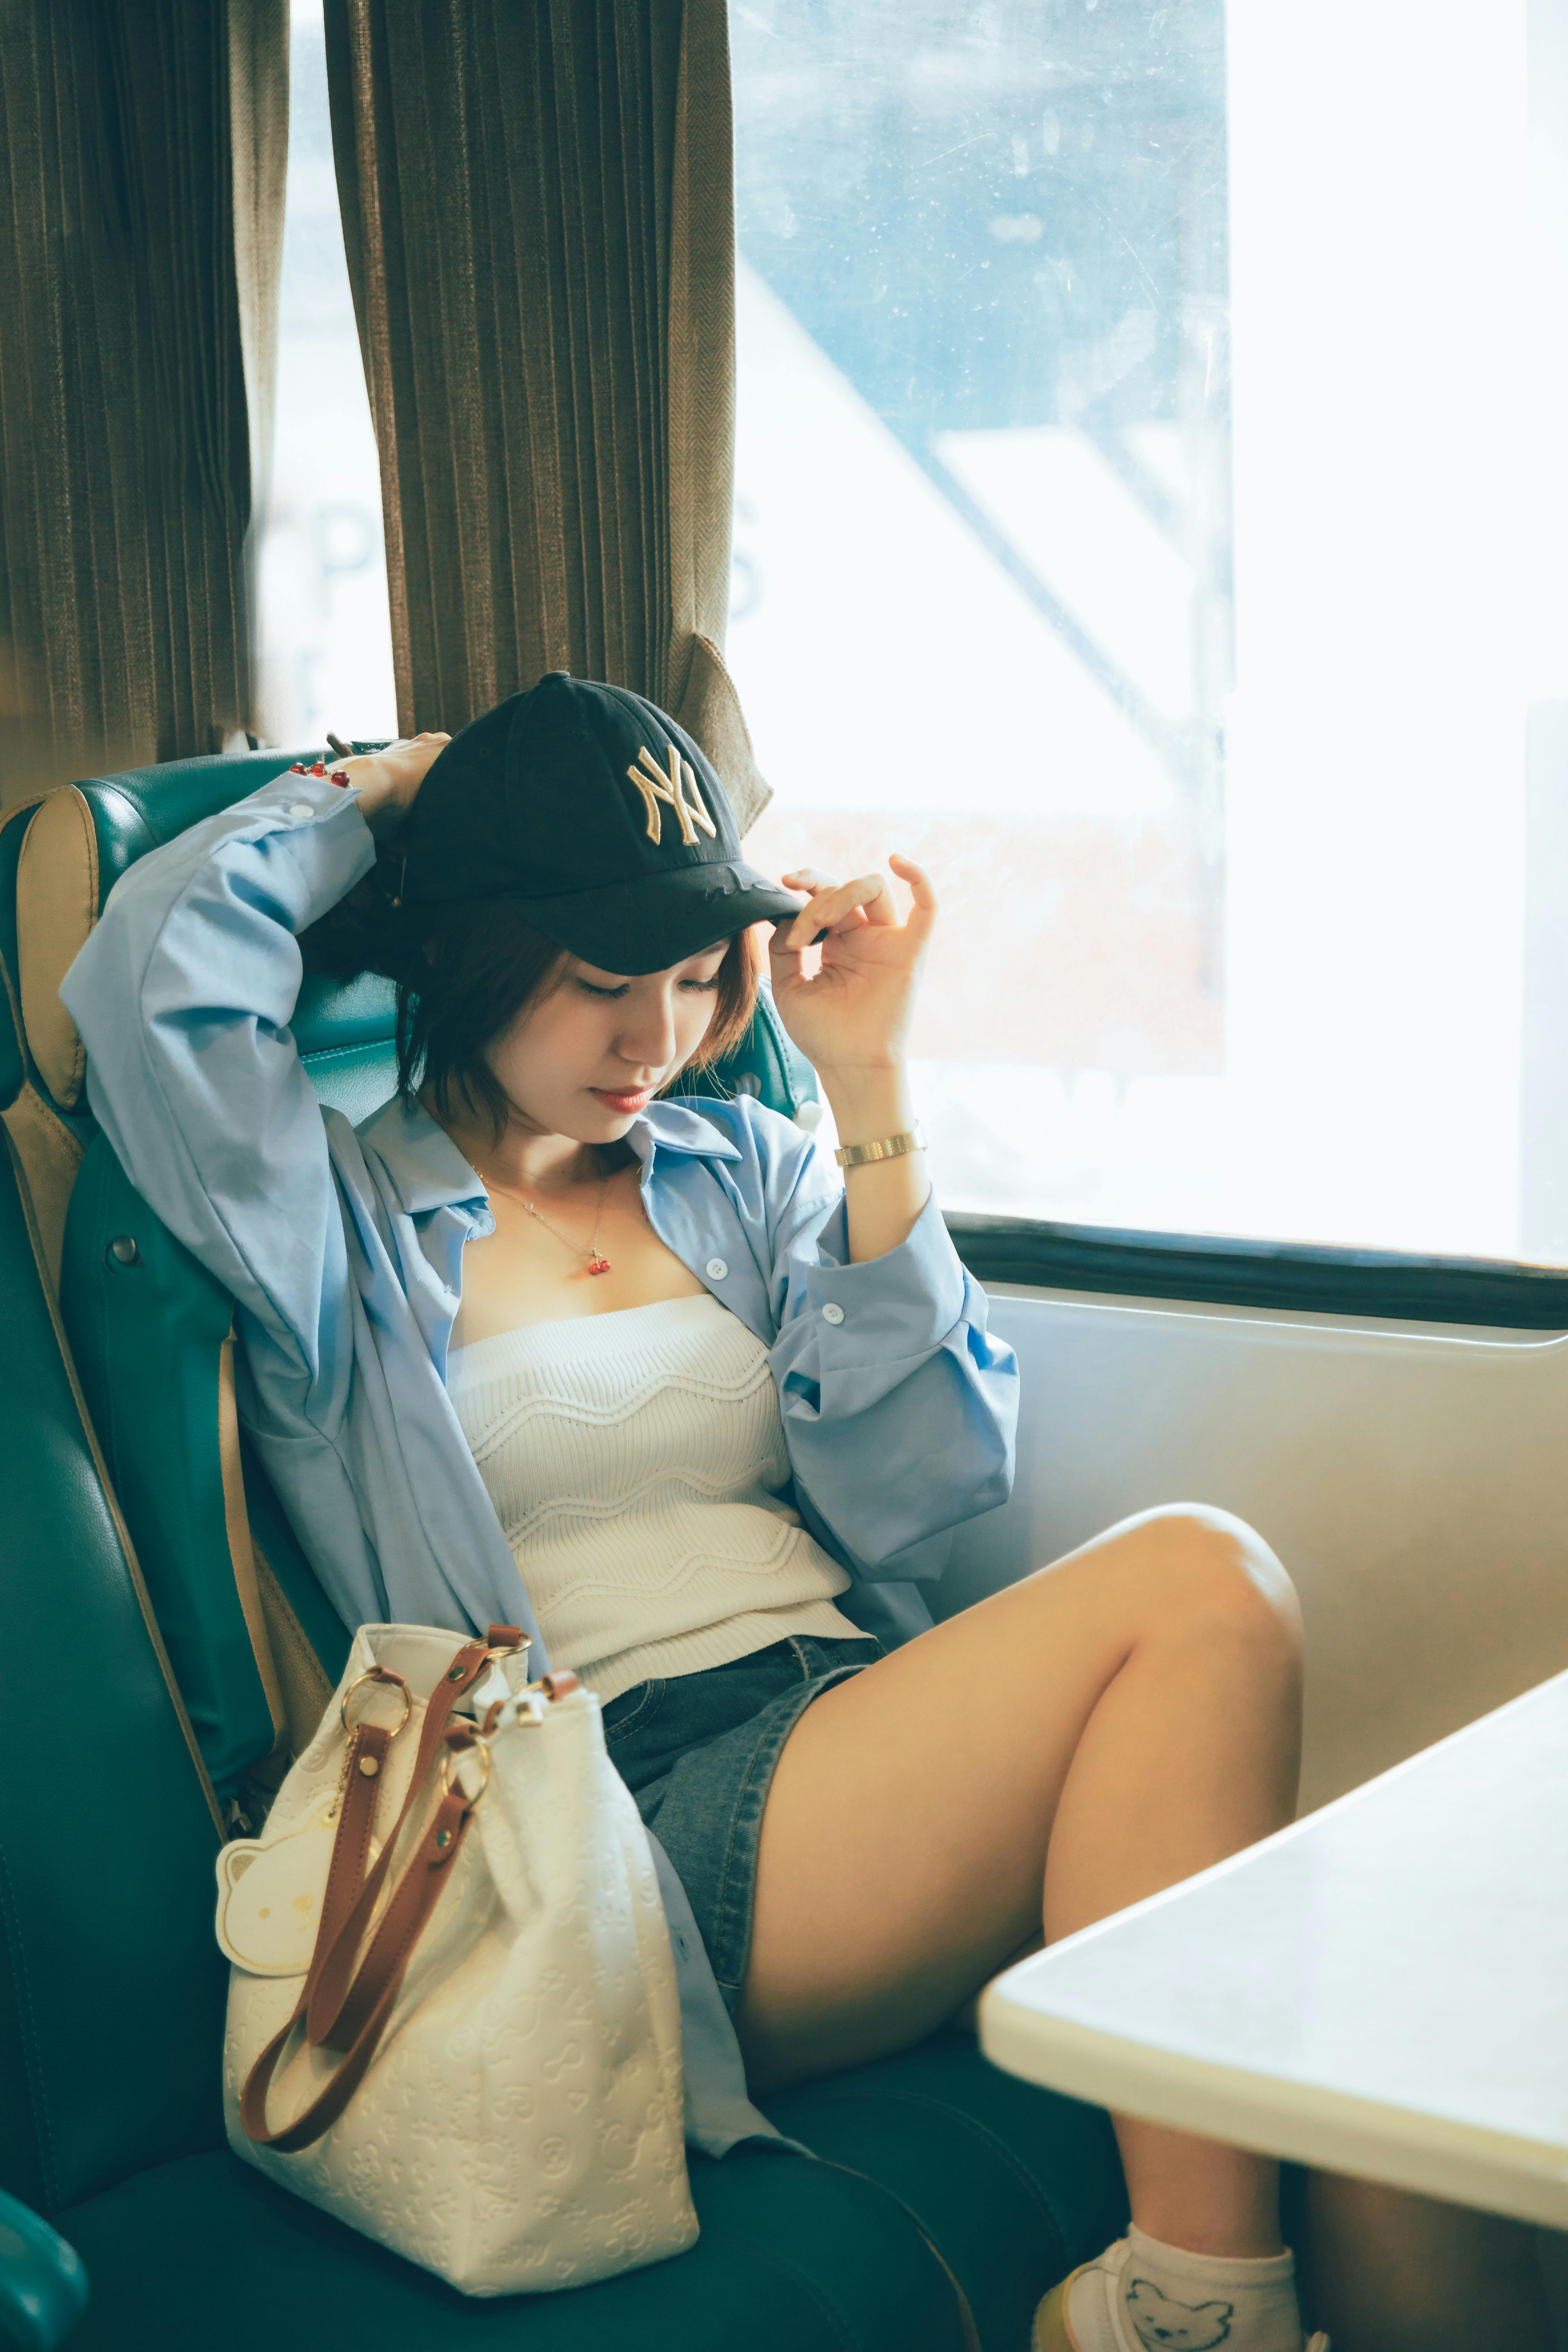 A woman sitting on the subway | Source: Pexels